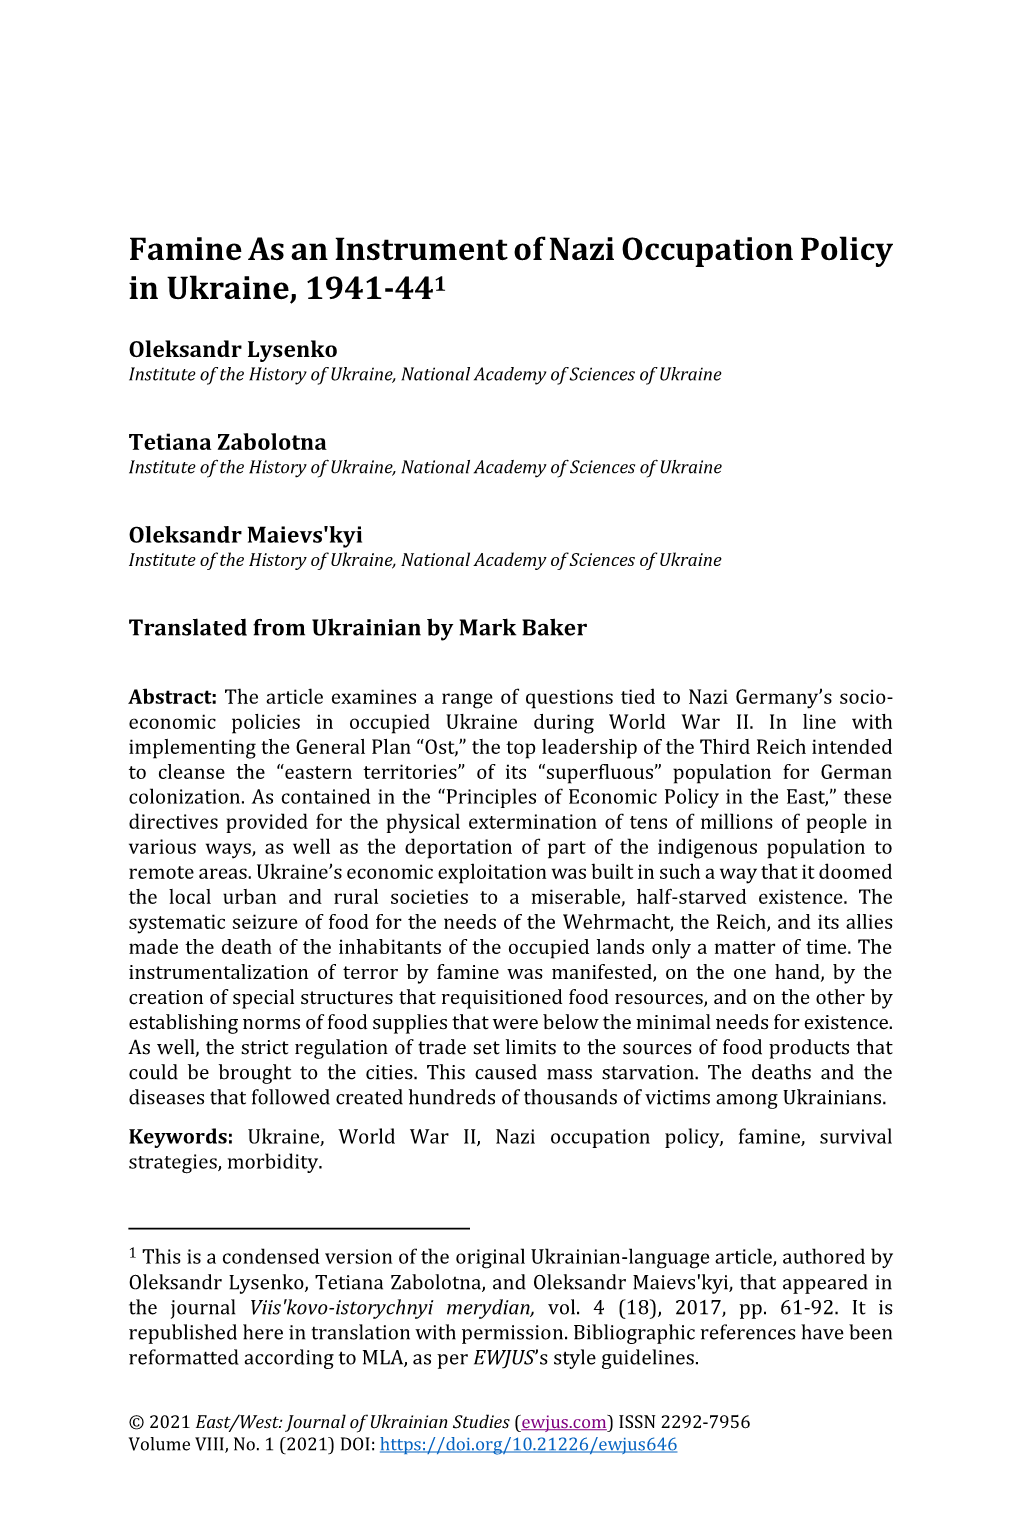 Famine As an Instrument of Nazi Occupation Policy in Ukraine, 1941-441